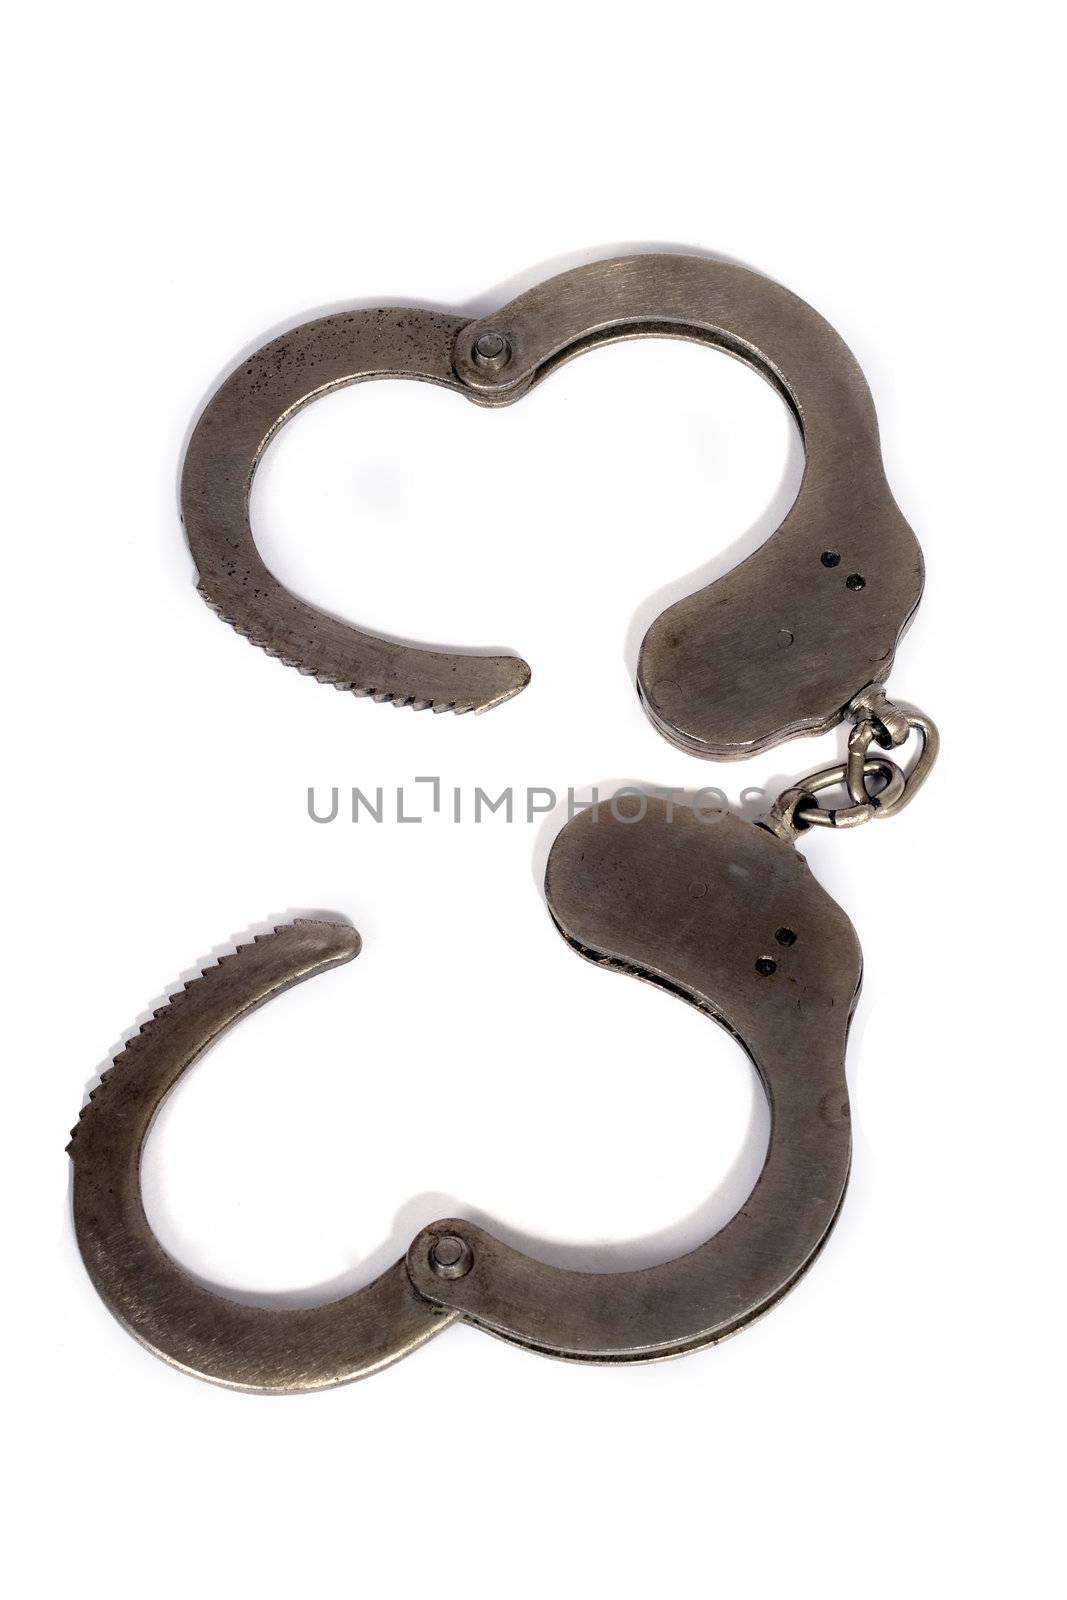 steel handcuffs. isolated on a white background. by acidgrey